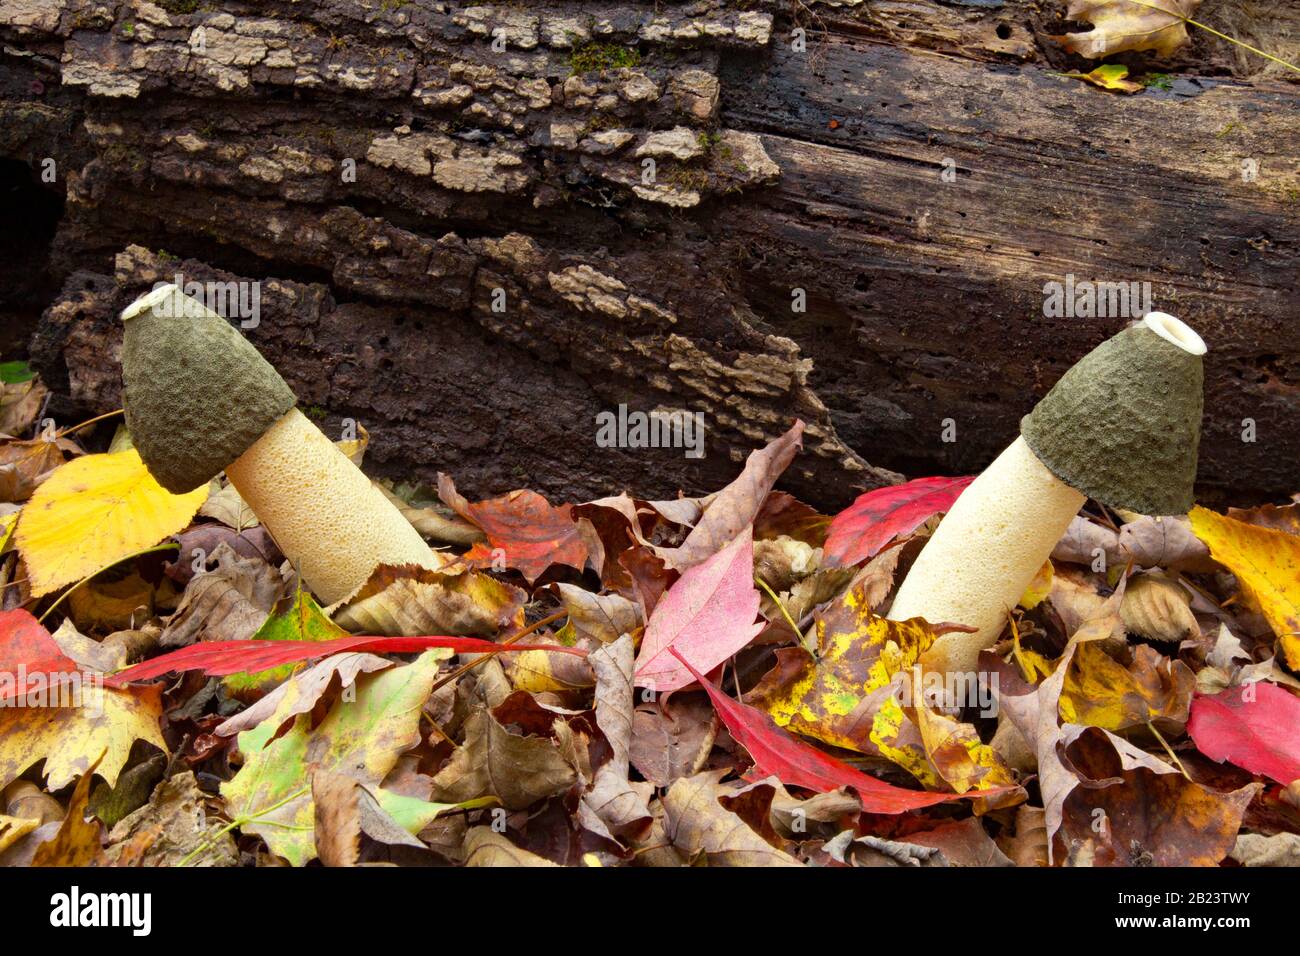 Ravenel's Stinkhorn, an eastern North American fungus, is usually found growing near decaying wood is noted for its foul odor and phallic shape when m Stock Photo